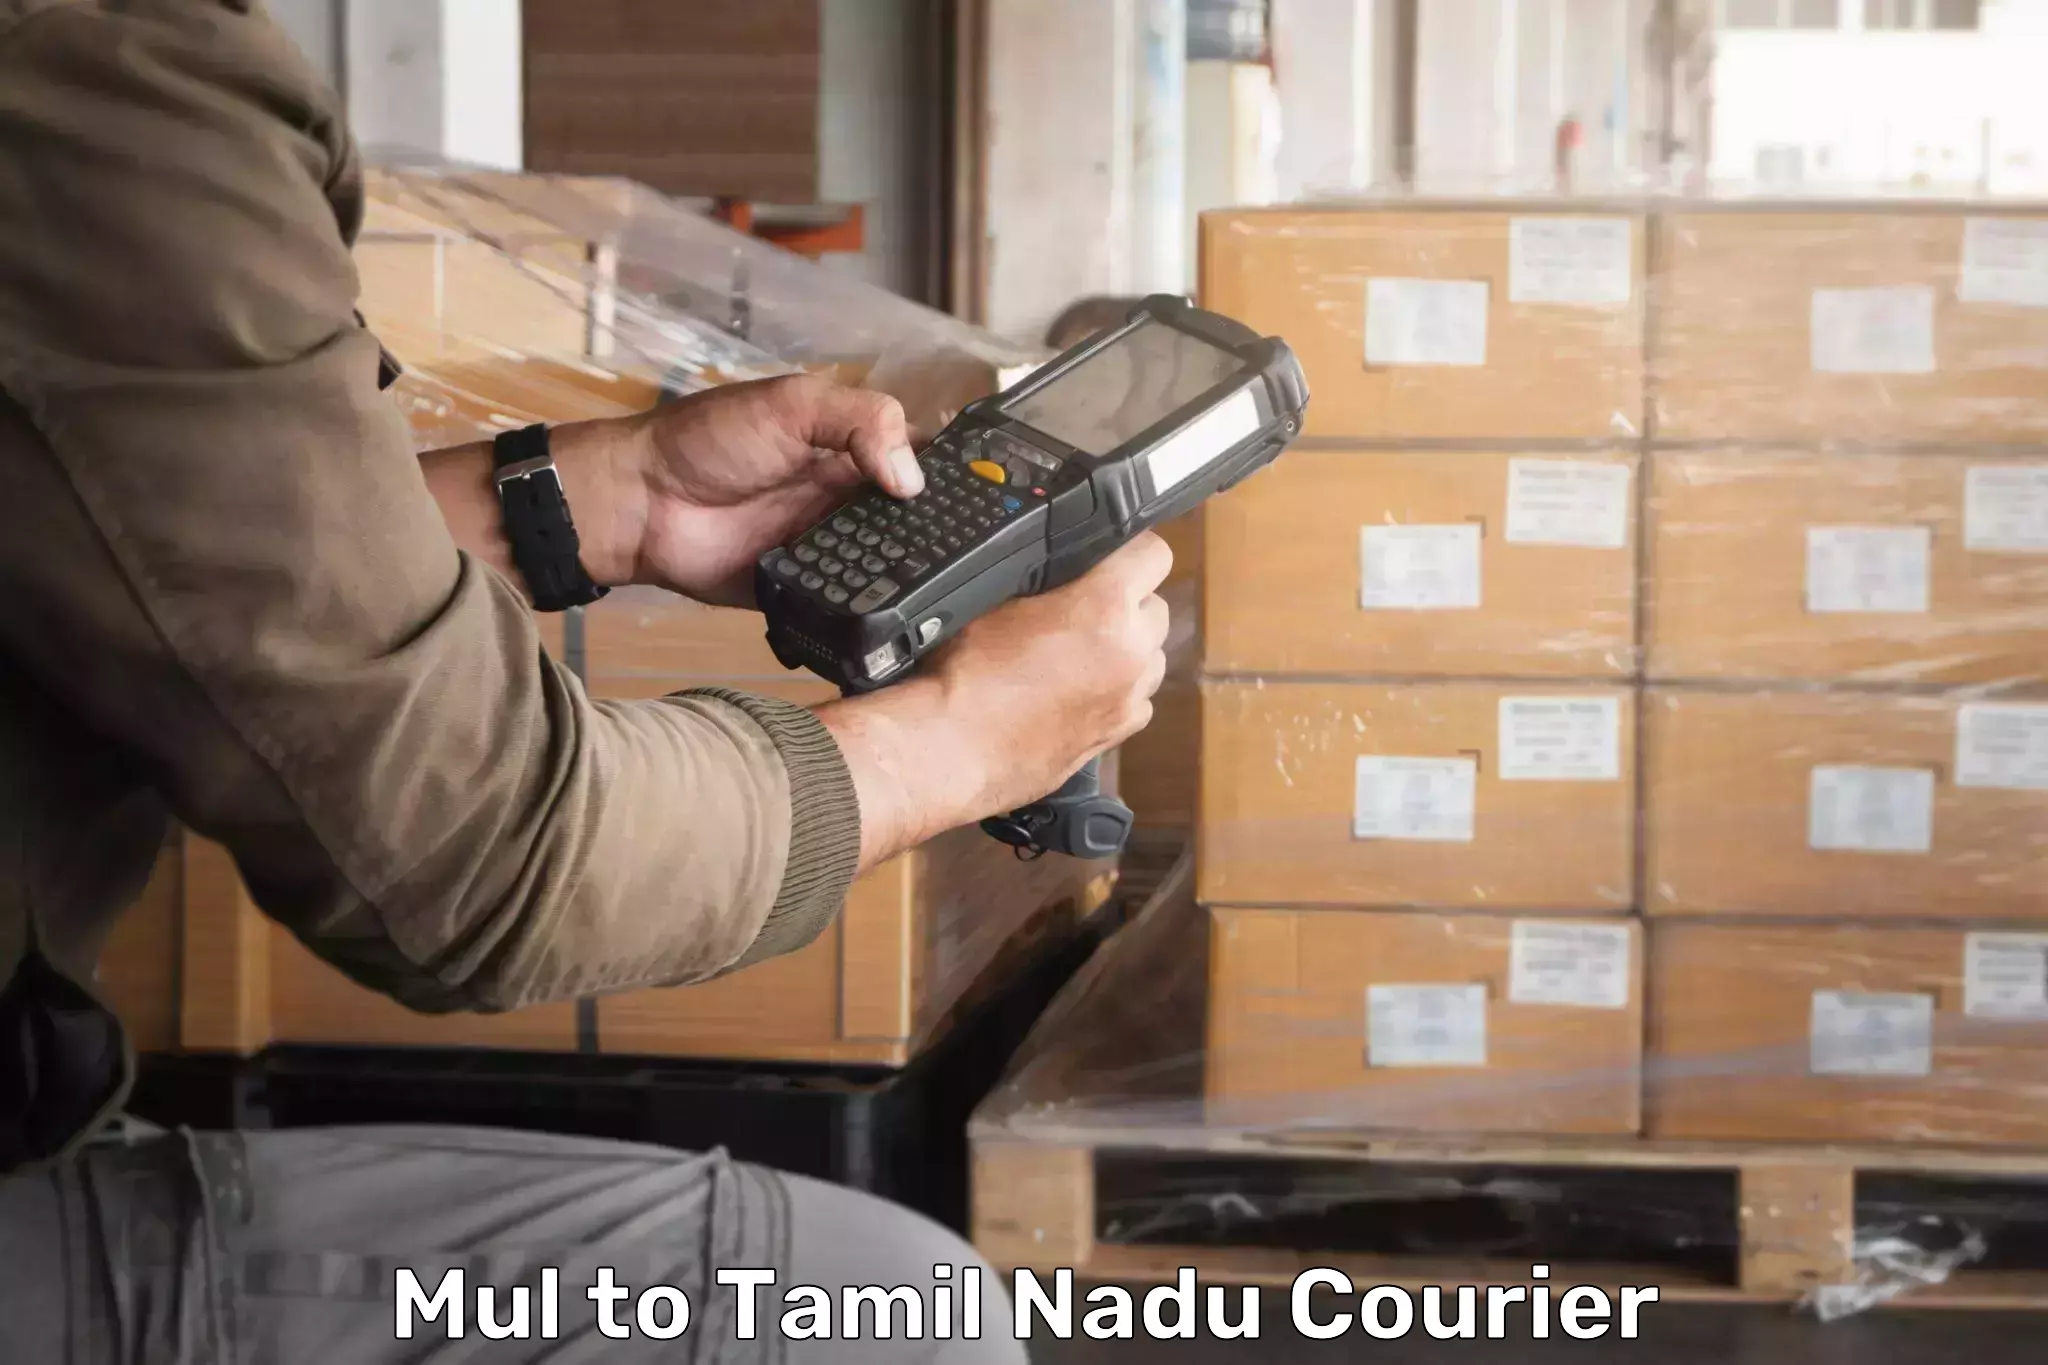 Package delivery network Mul to Tamil Nadu